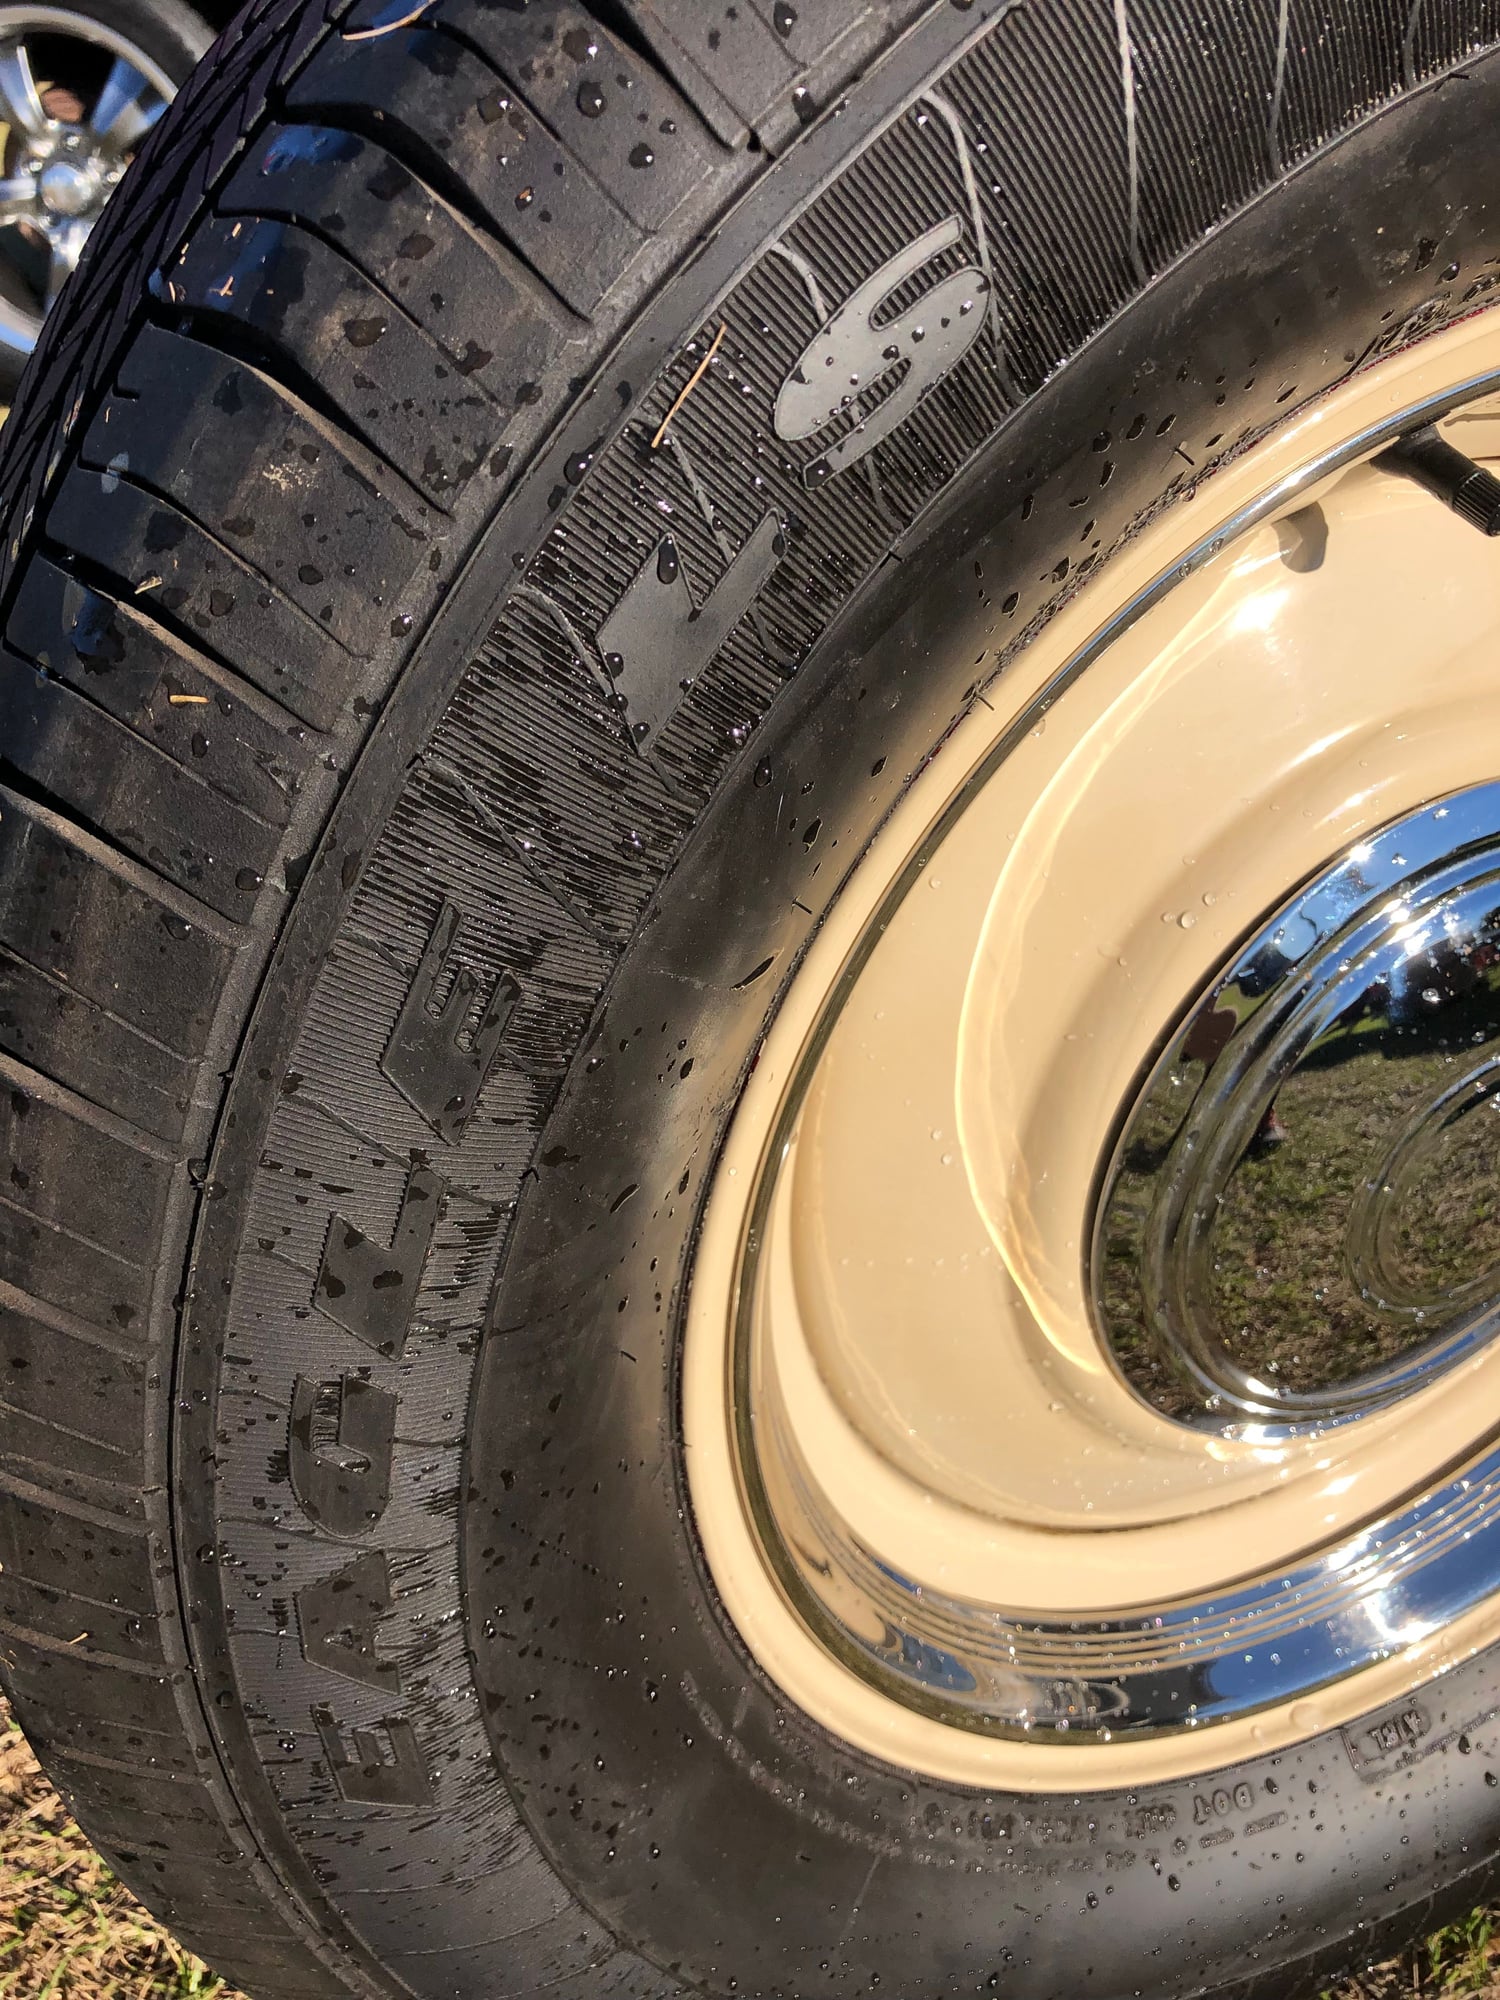 Wheels and Tires/Axles - Rims/Rings/Hubcaps/Tires from 72 F100 - Used - 1972 to 1978 Ford 1/2 Ton Pickup - Mobile, AL 36607, United States